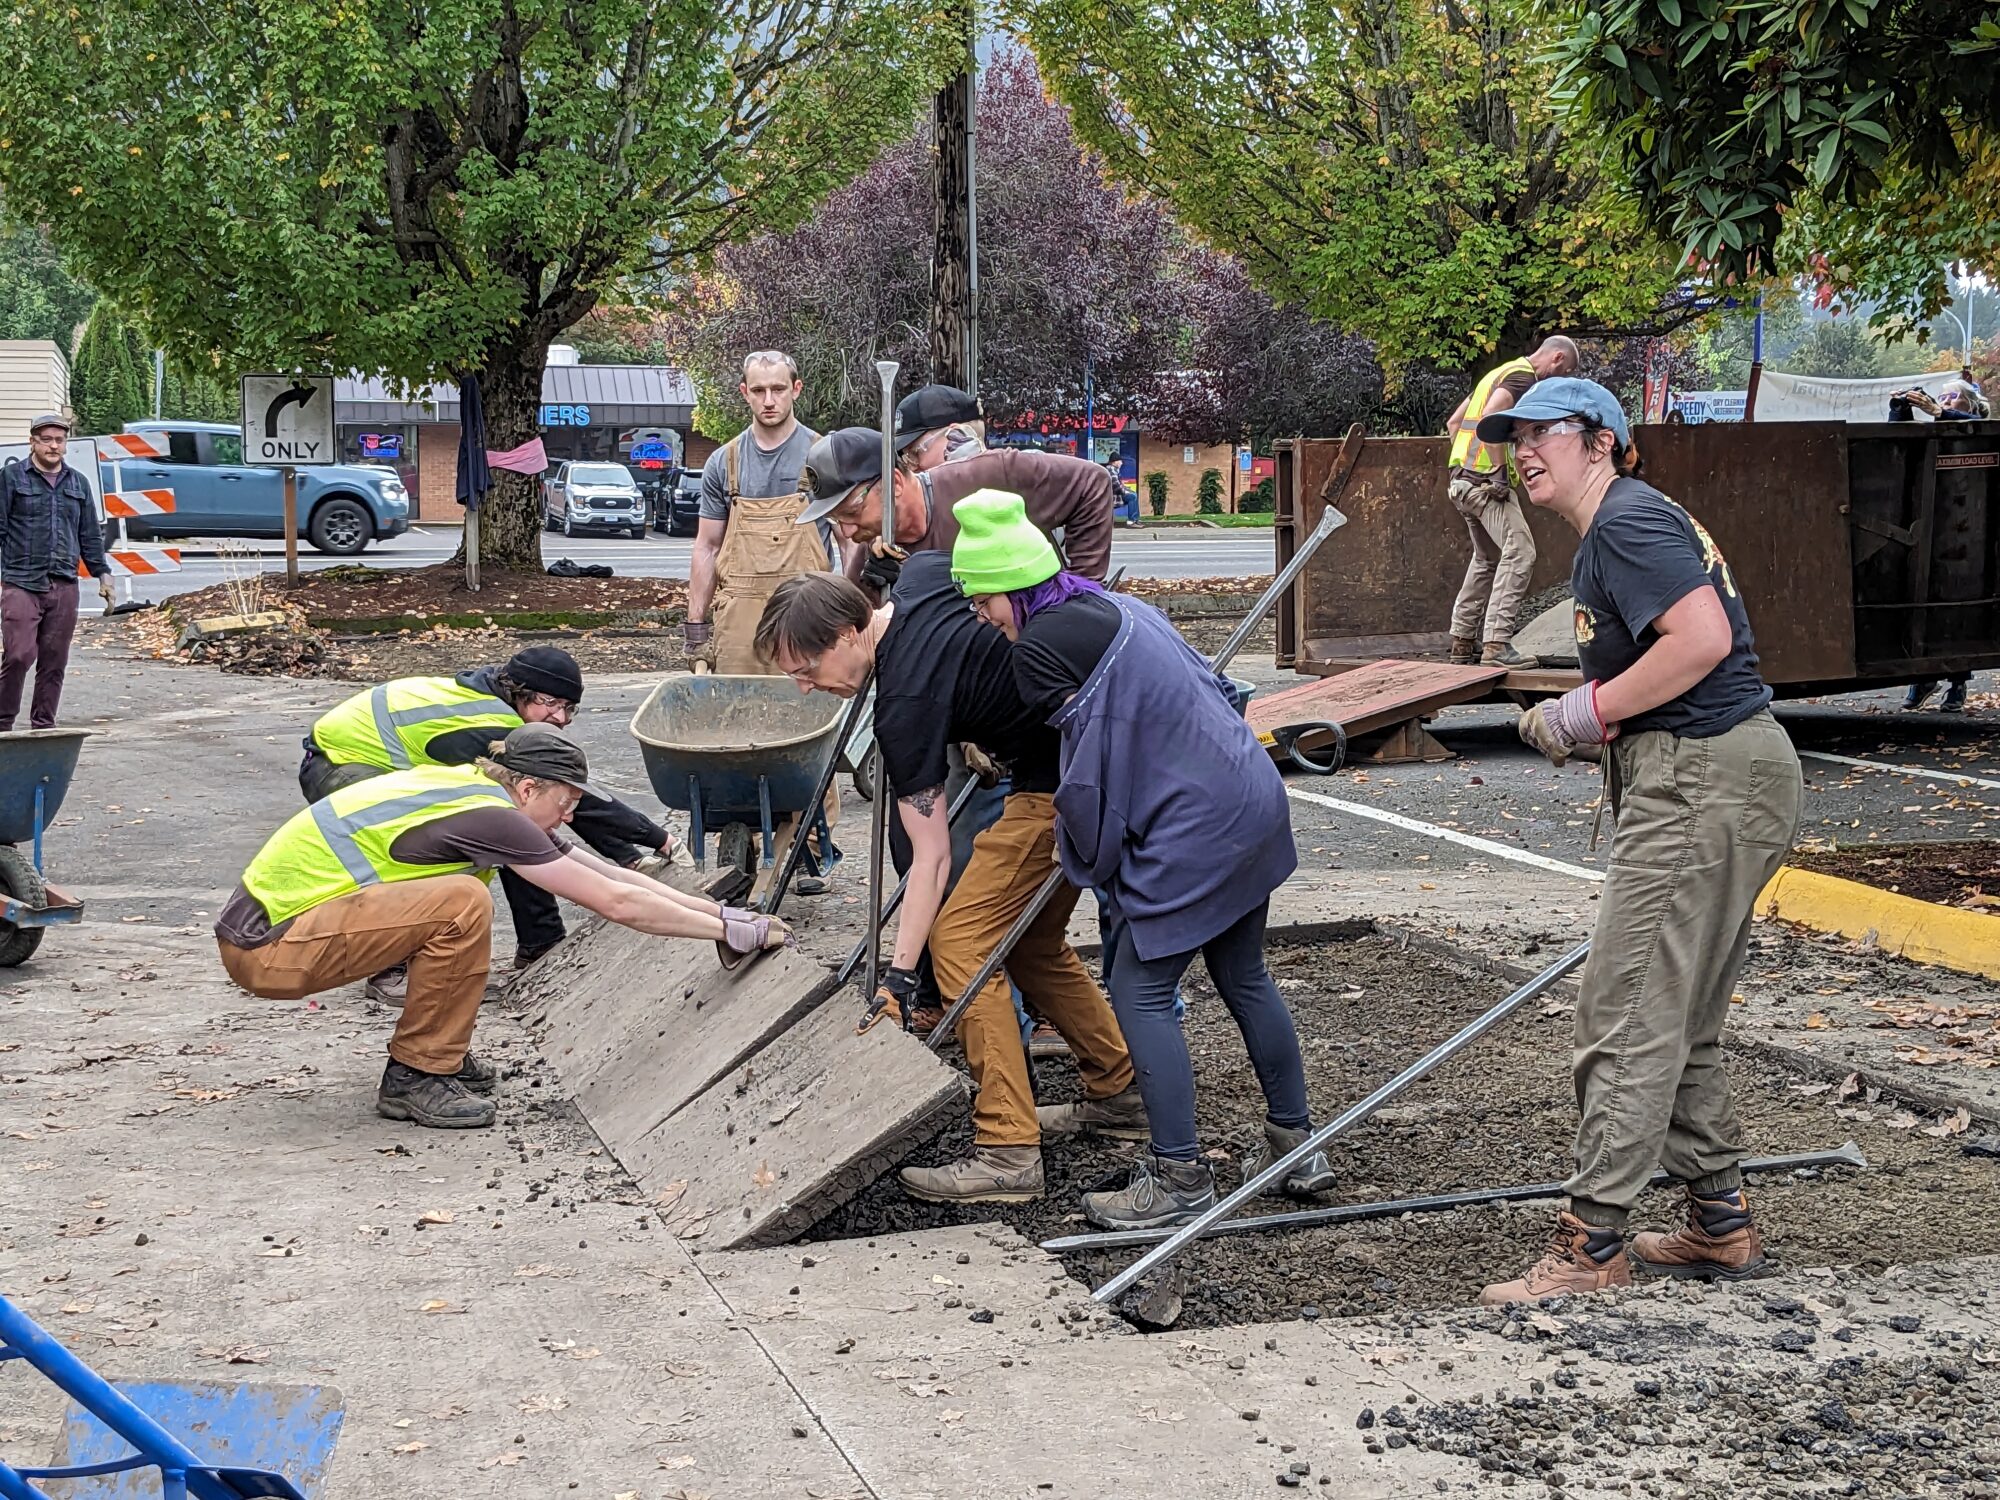 A group of 8 volunteers work together to remove a large piece of concrete. 2 volunteers are on the left side of the concrete pulling towards them while 4 volunteers on hte rights side of the slab of conrete use pry bars to push. 